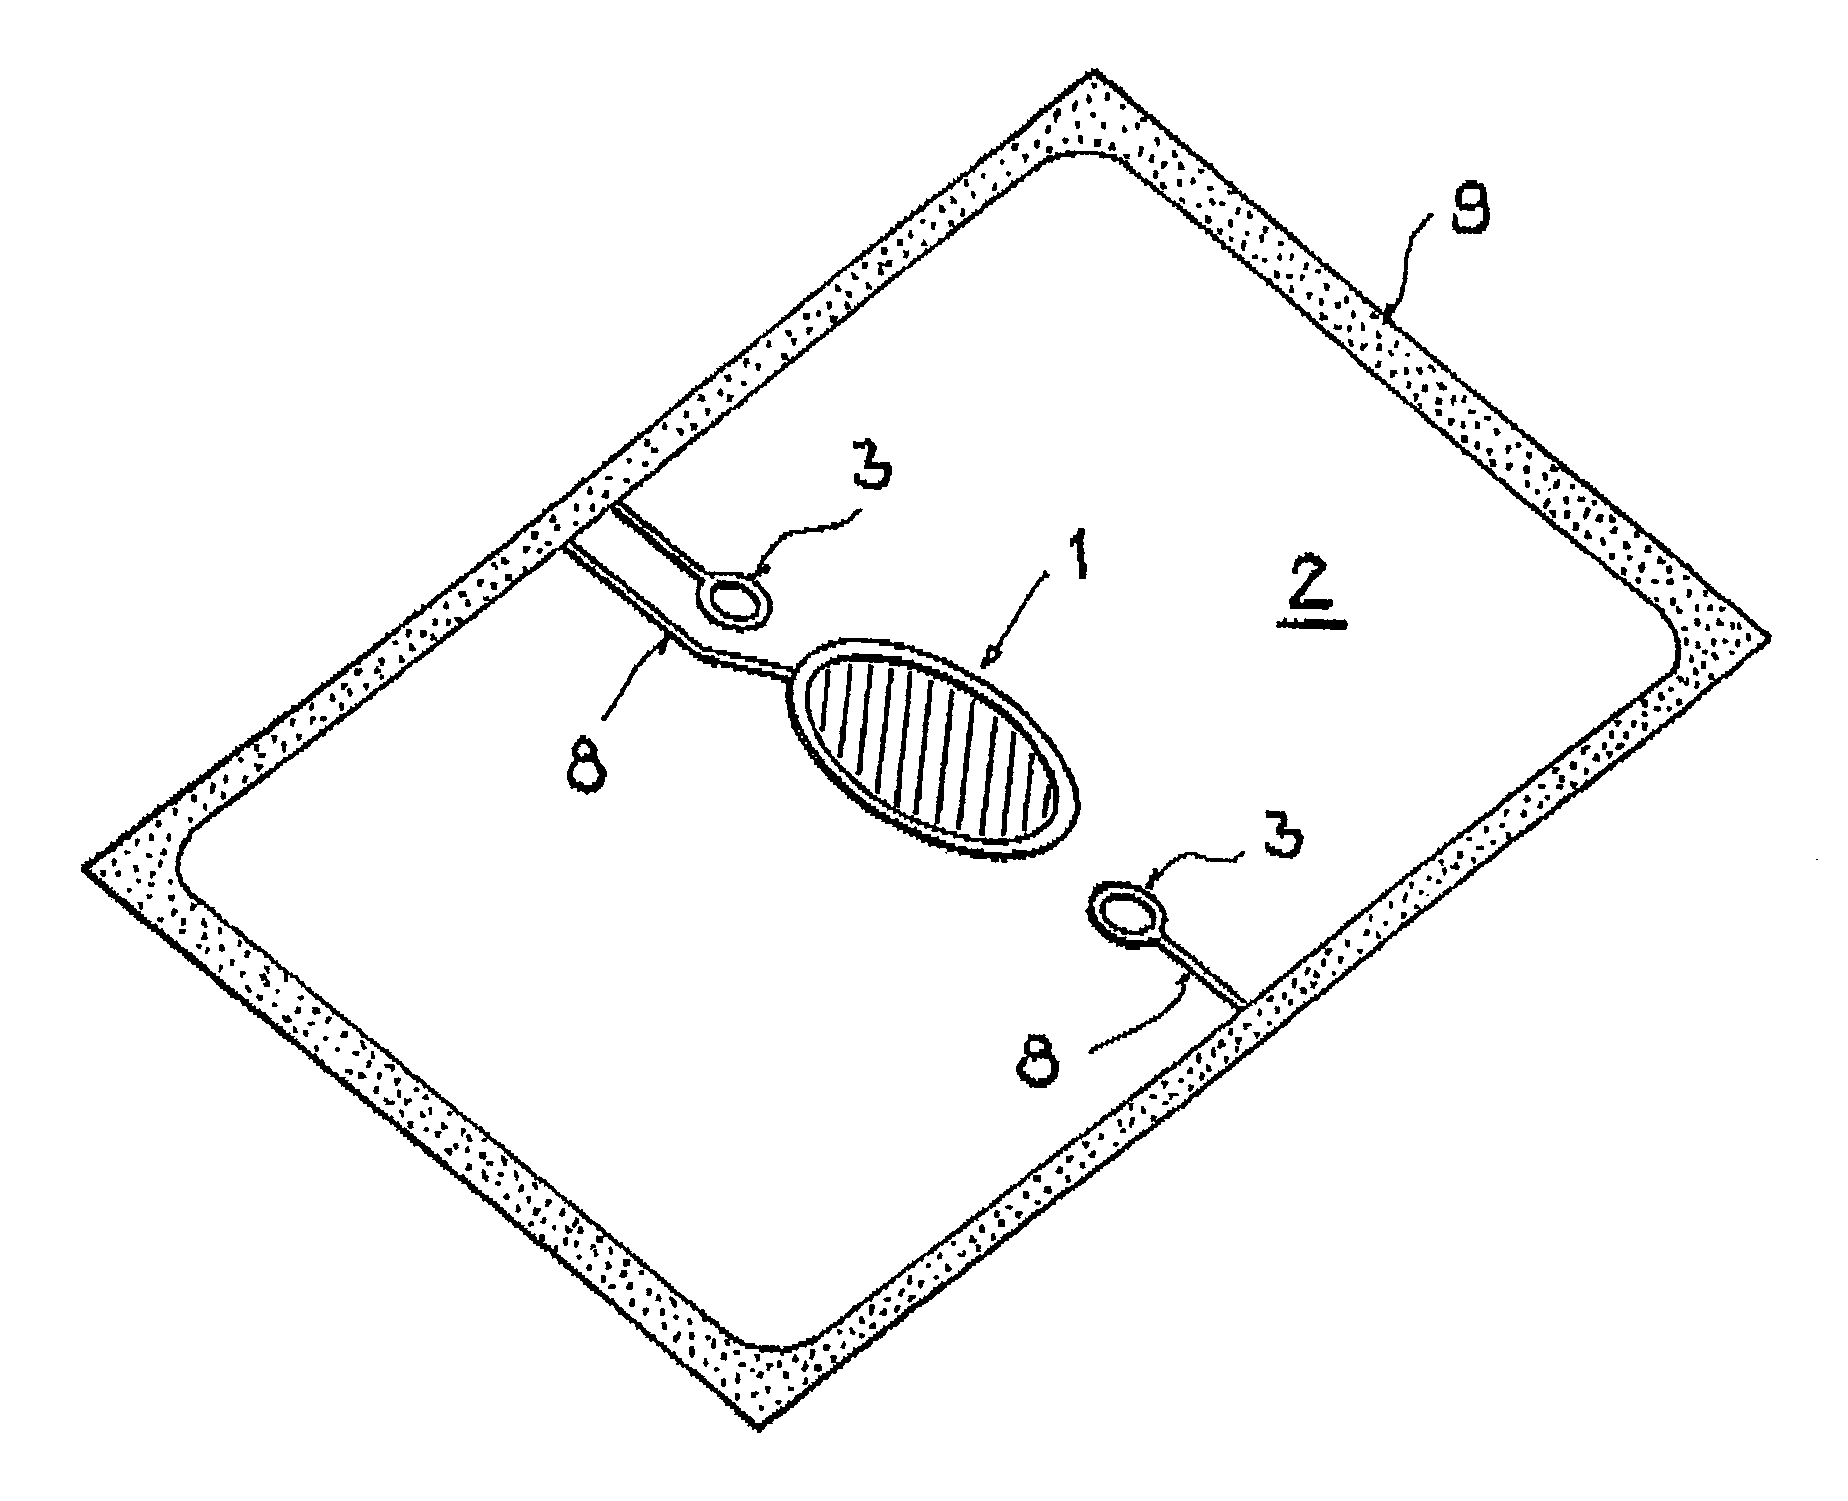 Light for the passenger compartment of a motor vehicle